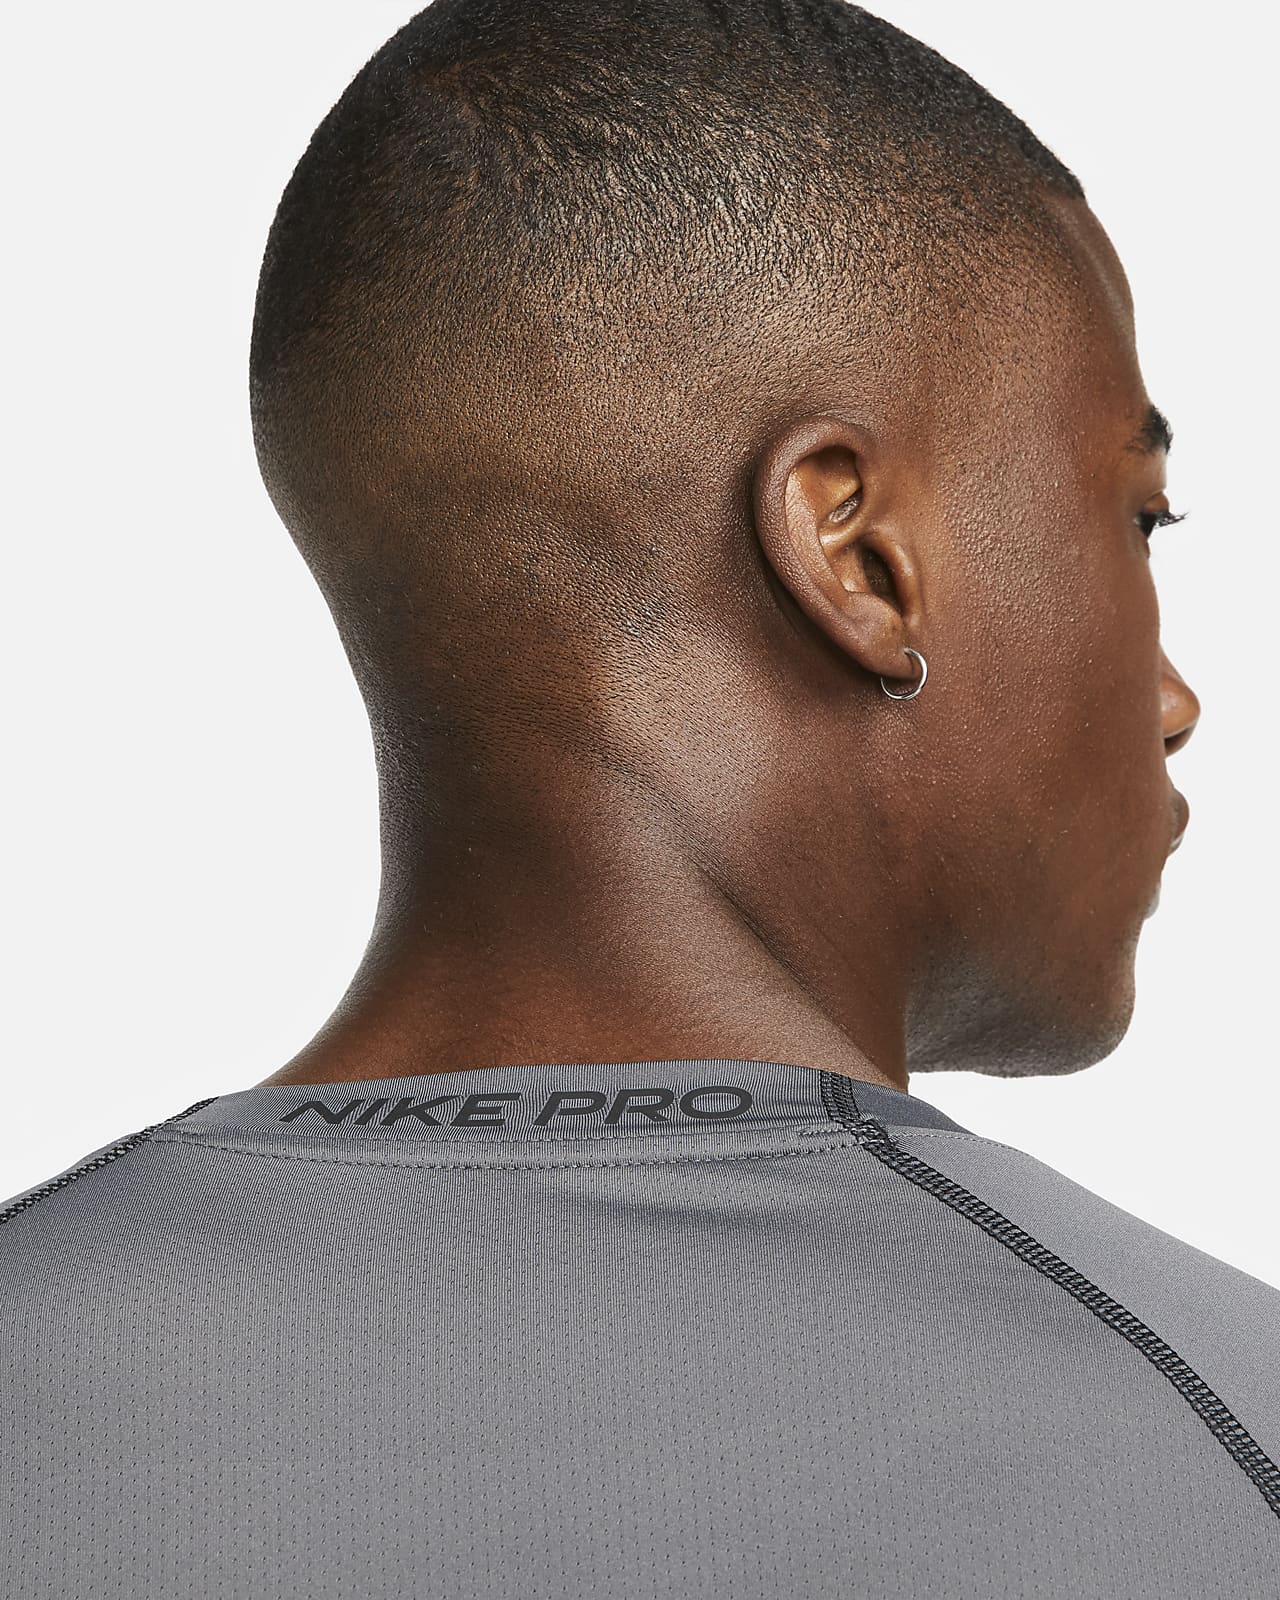 Nike Pro Dri-FIT Men's Tight Fit Short-Sleeve Top, Iron Grey/Black, X-Large  : : Clothing, Shoes & Accessories